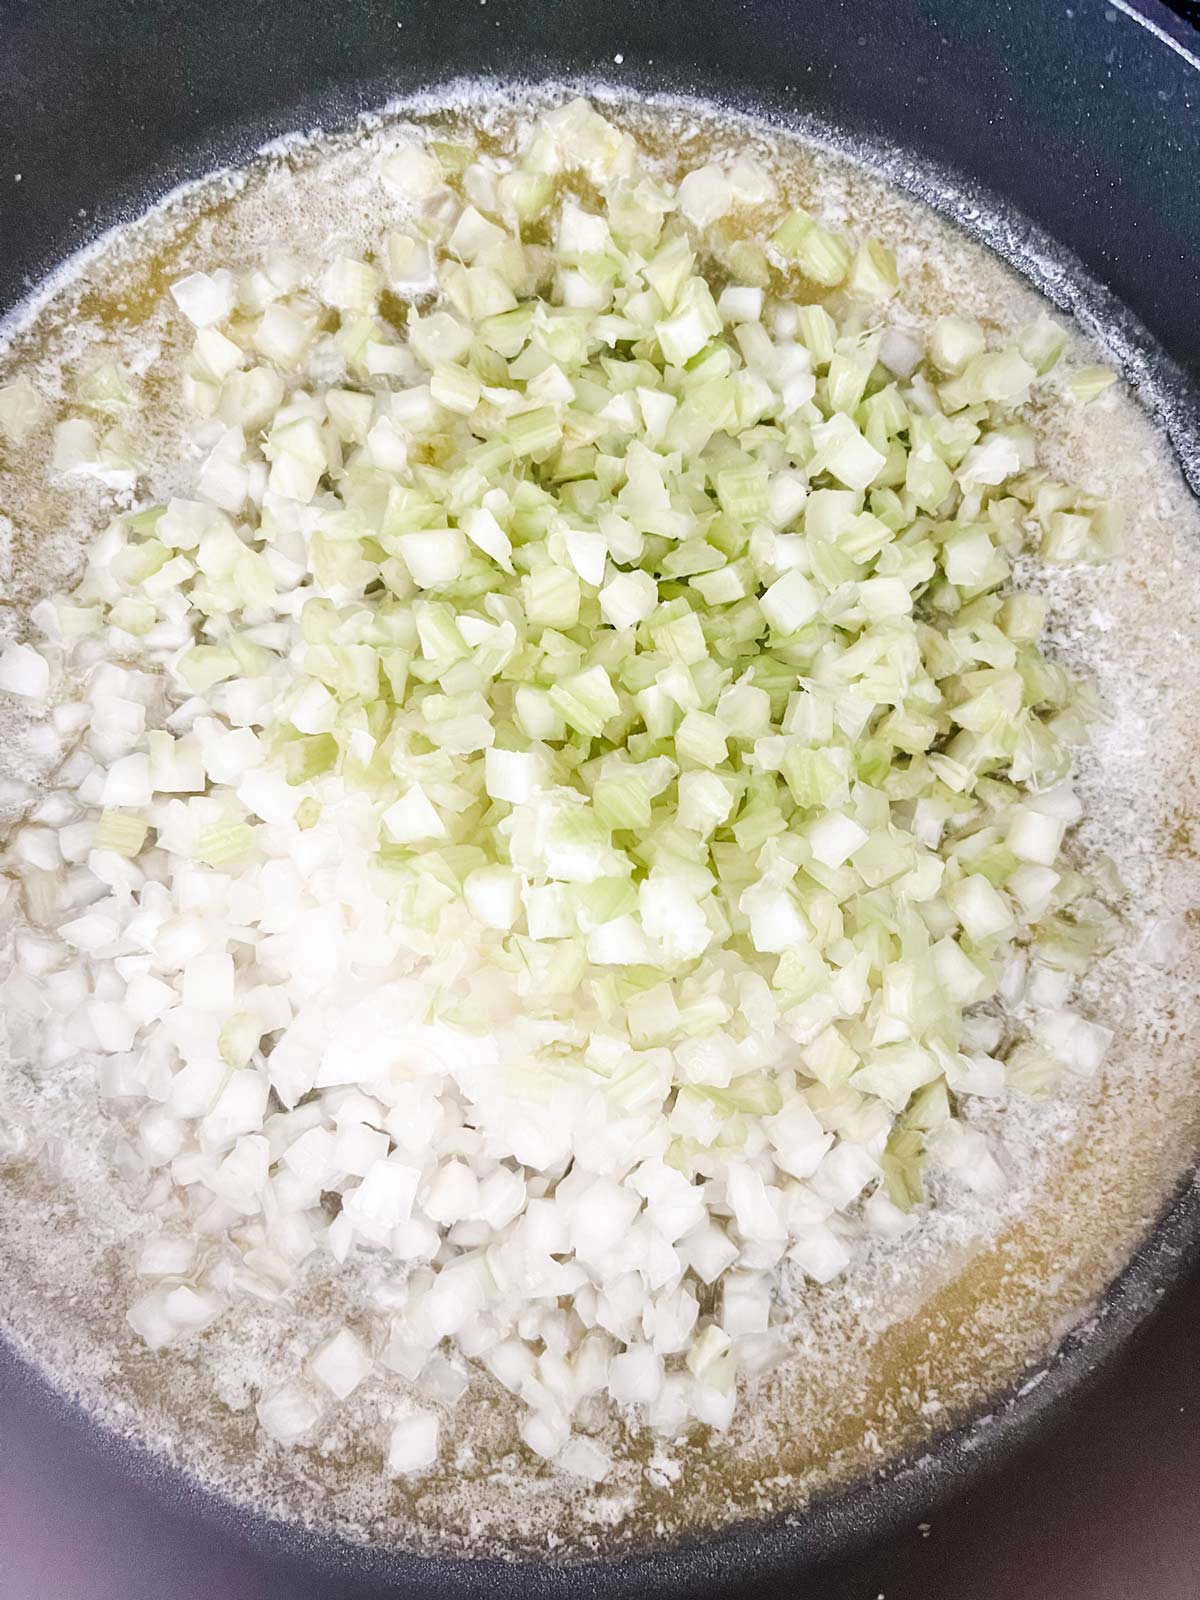 Onion and celery cooking in a pan.